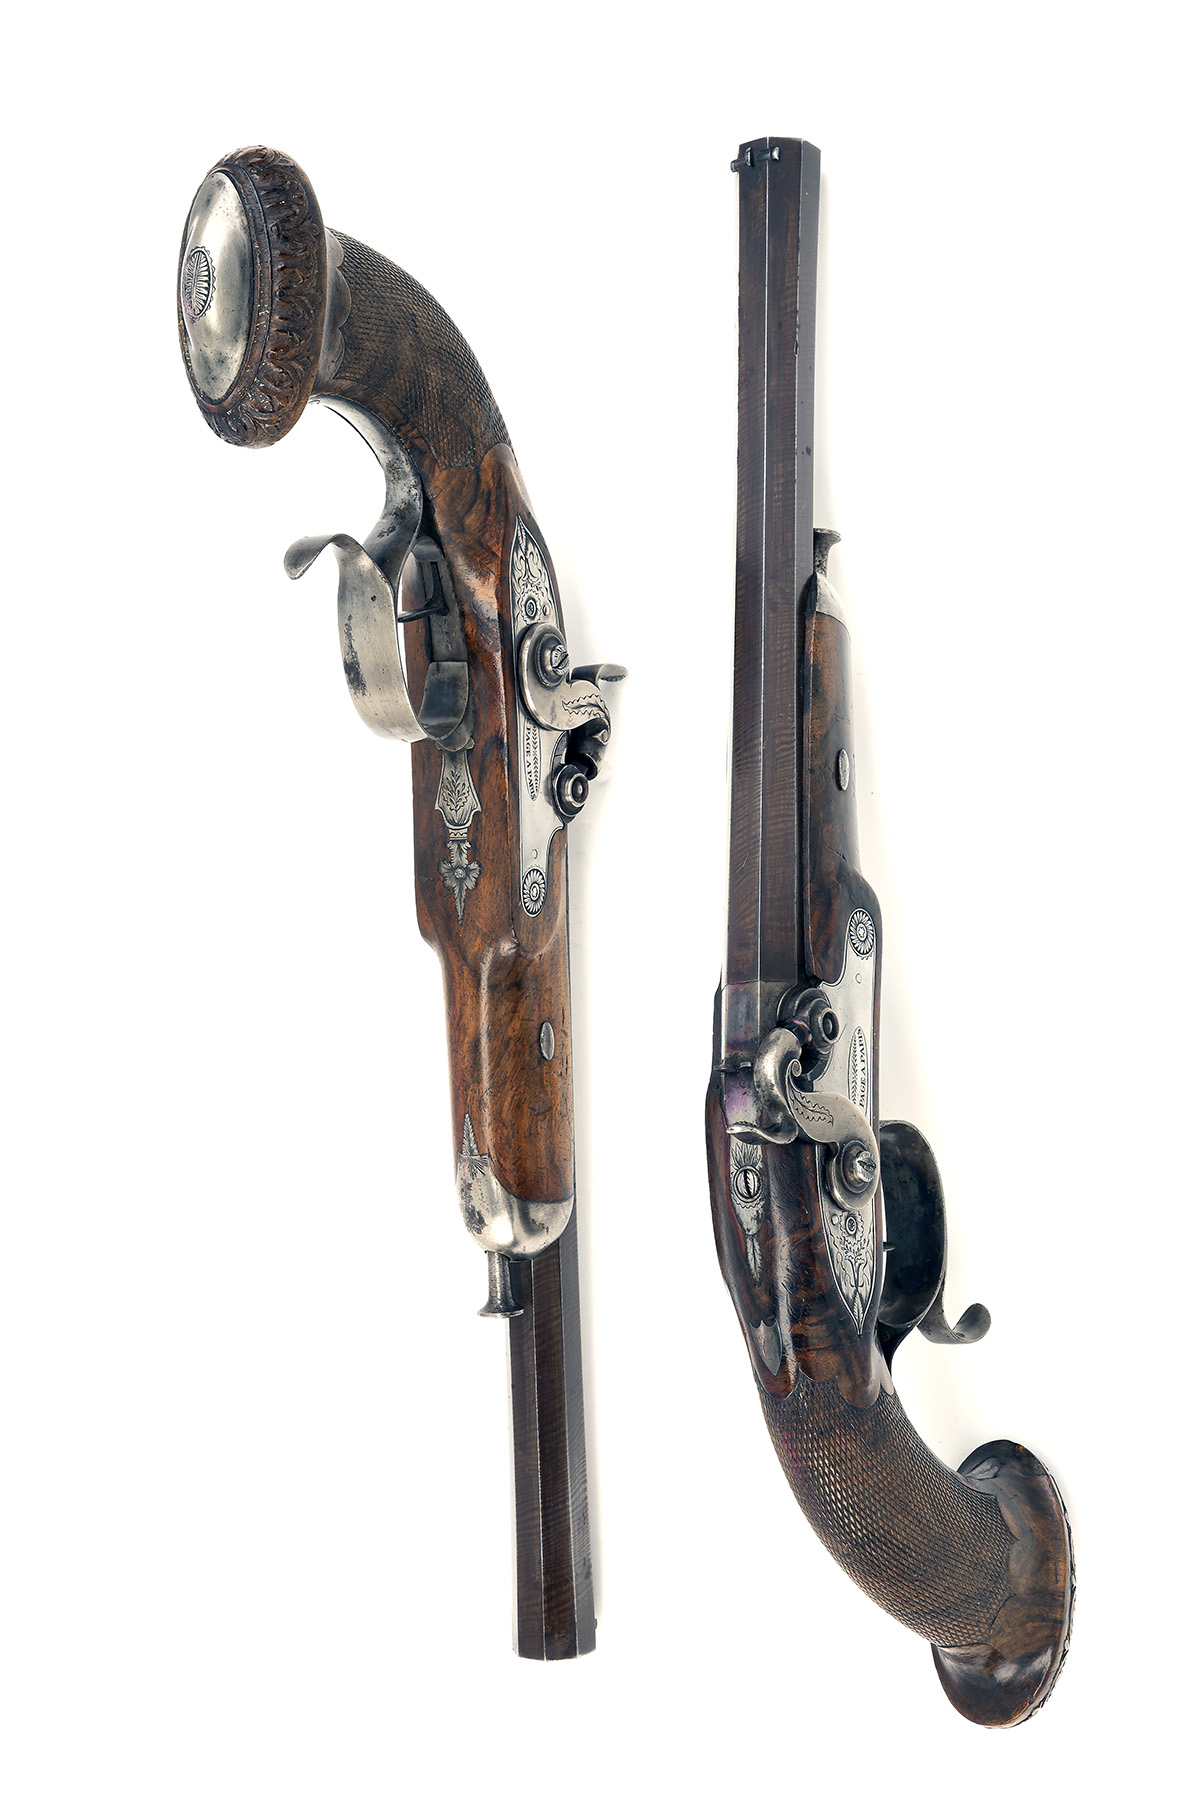 A CASED PAIR OF 28-BORE PERCUSSION RIFLED OFFICER'S or TARGET PISTOLS BY LE PAGE, PARIS, no - Image 4 of 9